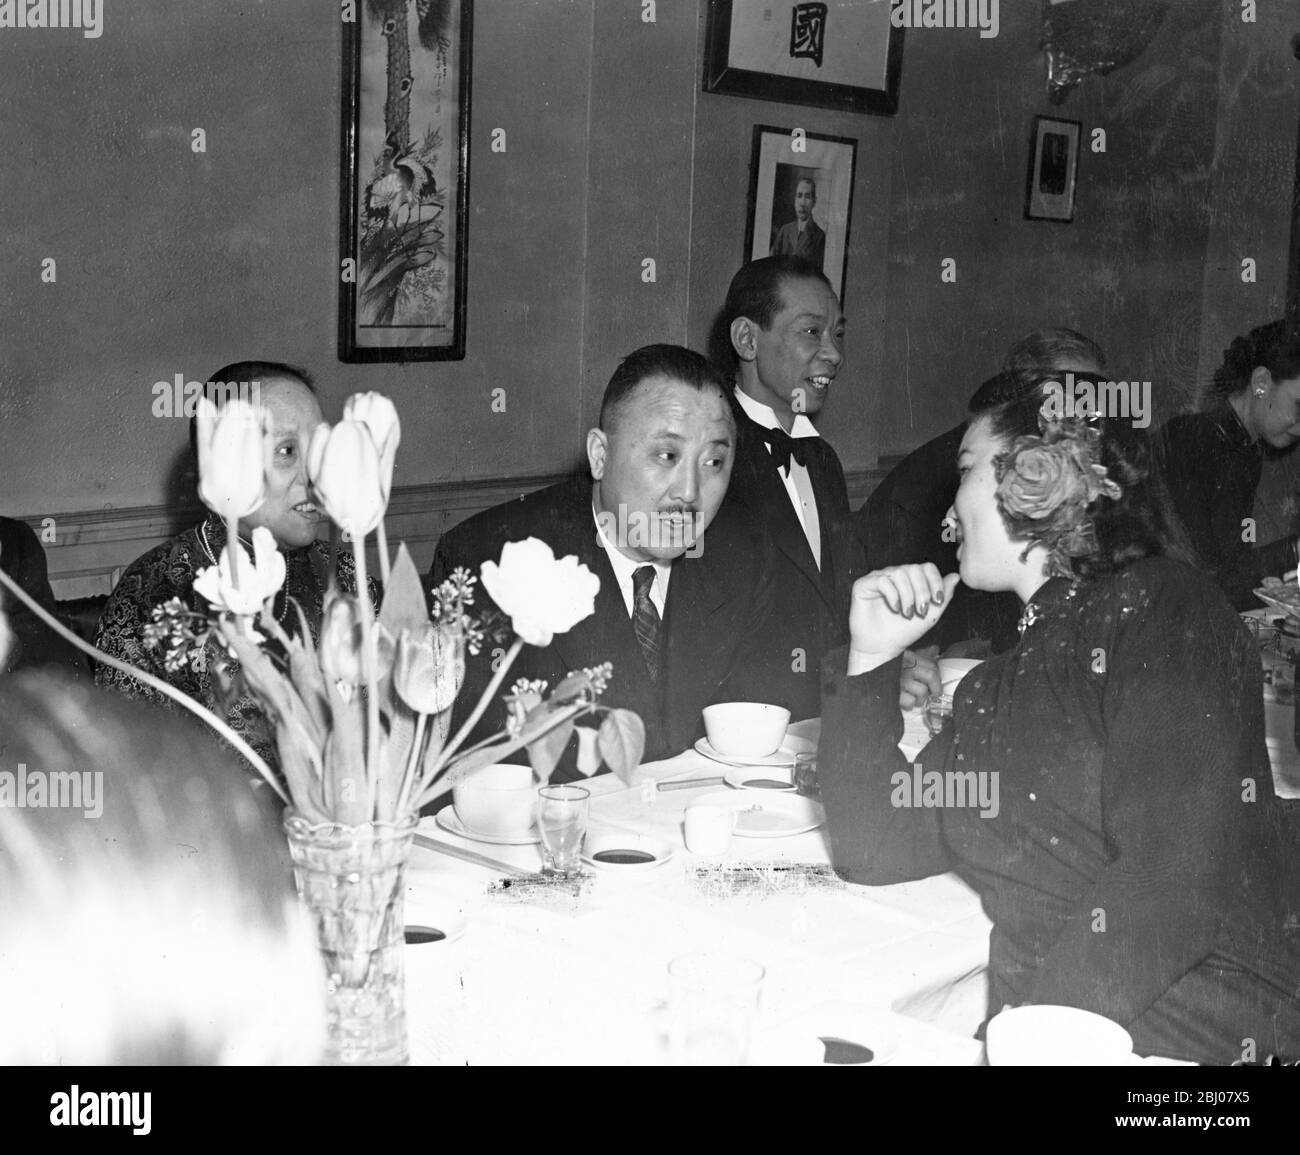 General Wei Li Huang in conversation with a member of the Chinese colony Miss Doris. S. Tan during a dinner at a Chinese restaurant in Wardour Street, to commemorate his service to the Burma campaign by the Chinese Chamber of Commerce. - 6 May 1947 Stock Photo